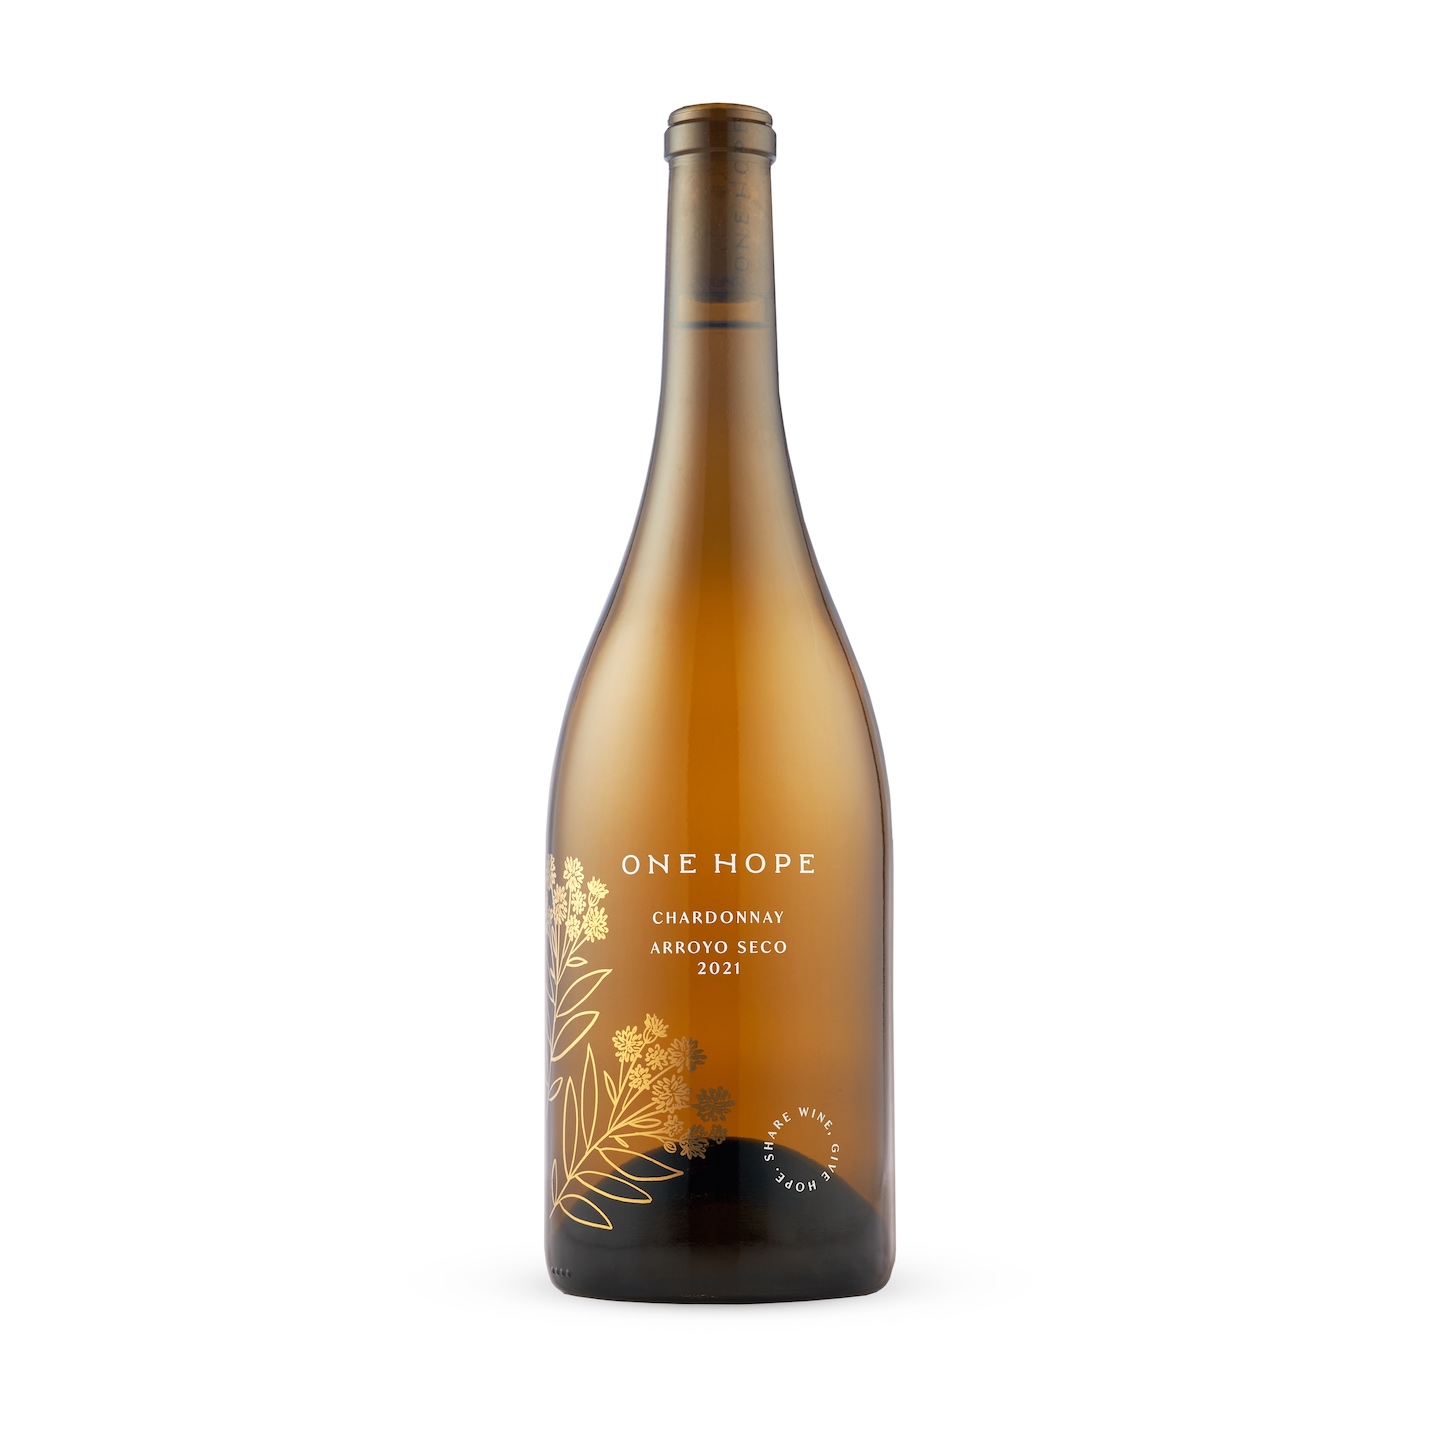 Shop our Best Reserve Chardonnay Arroyo Seco ONEHOPE